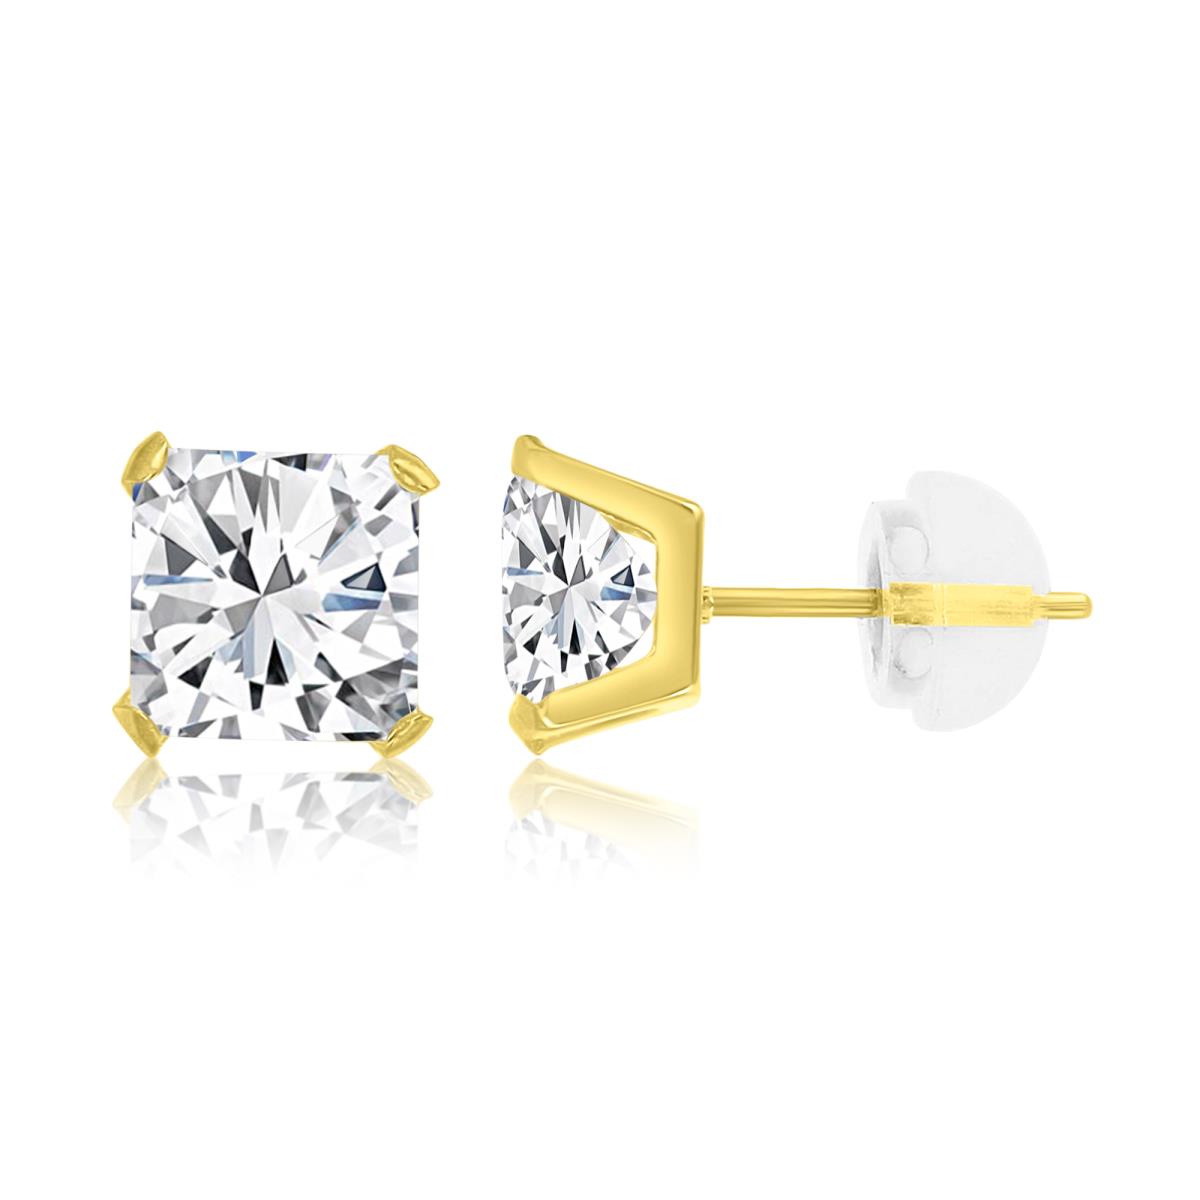 14K Yellow Gold 7x7 Square Martini Solitaire Stud Earring